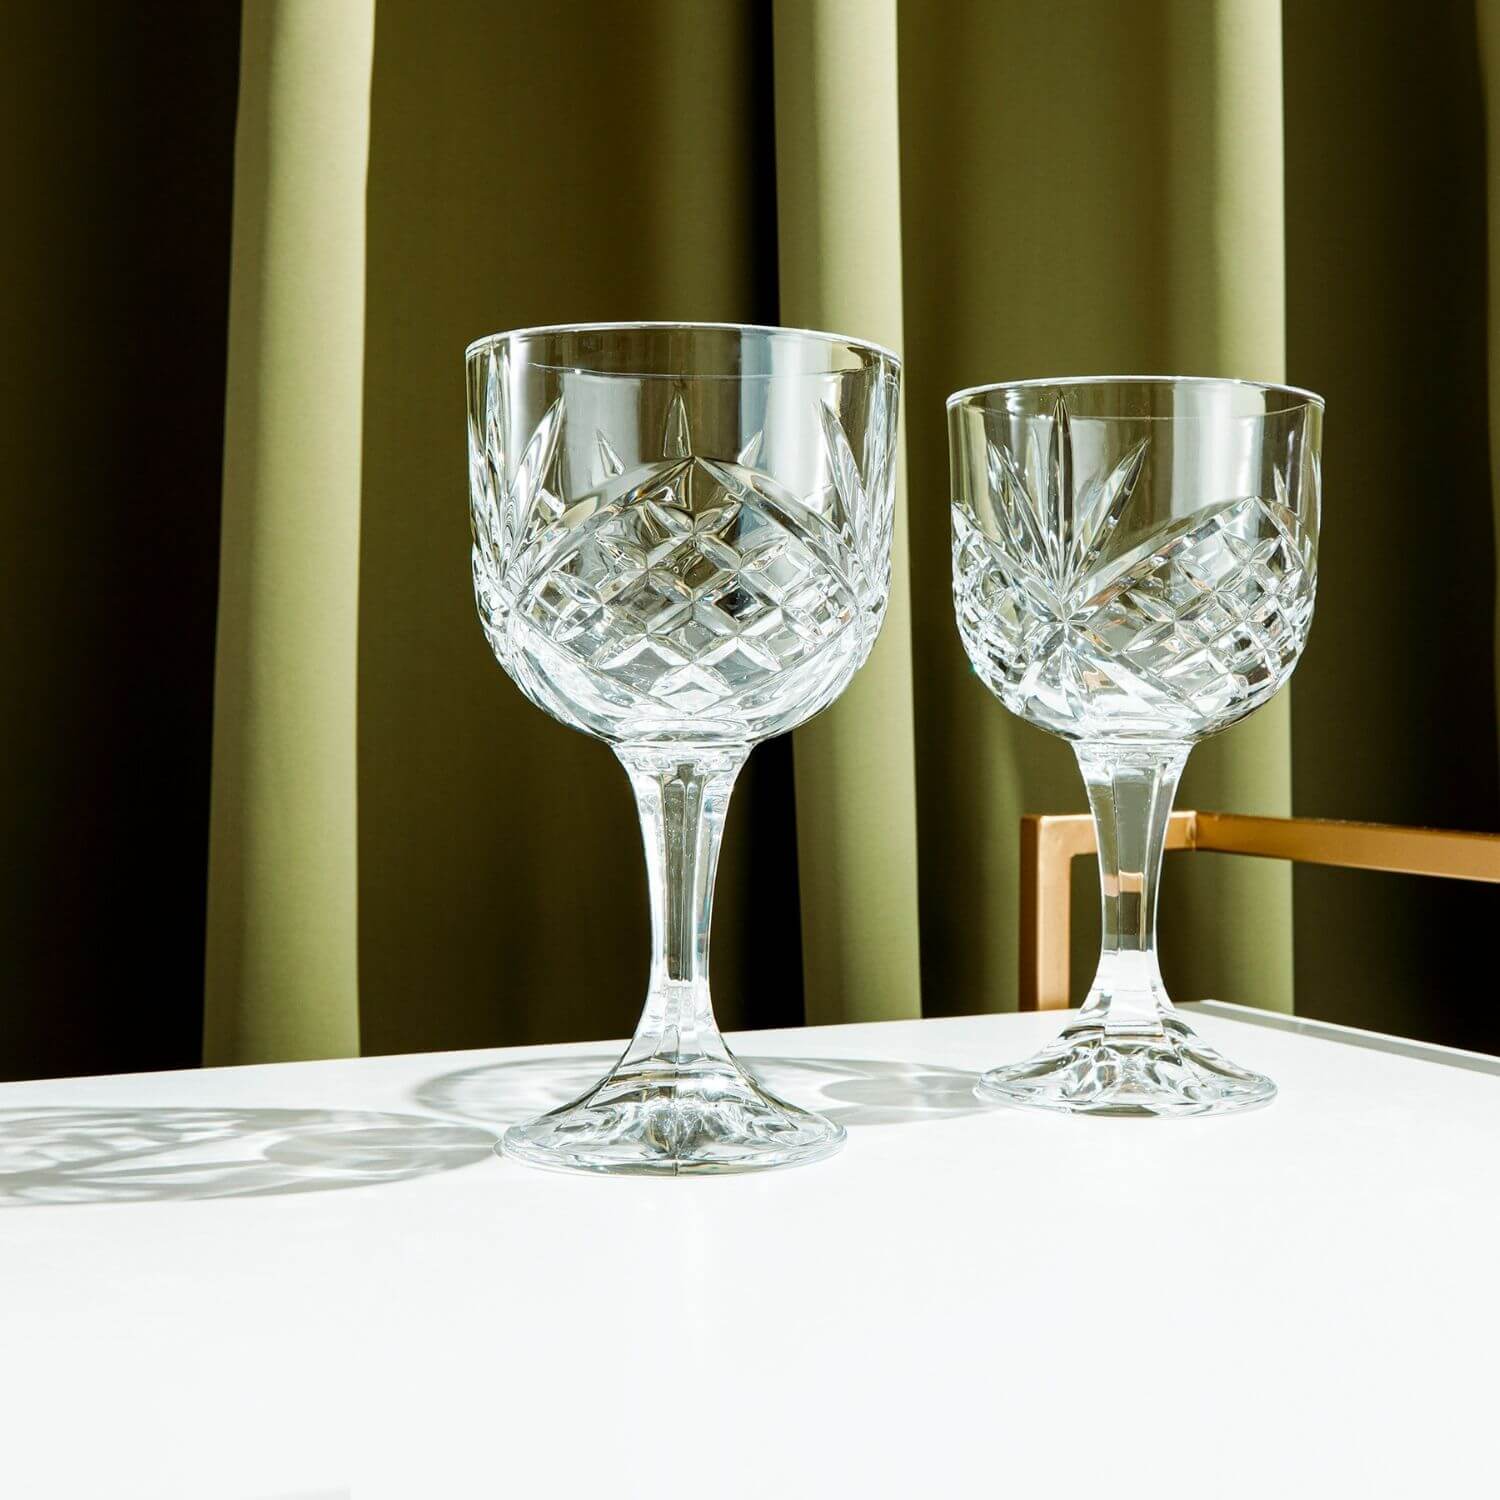 Killarney Crystal Trinity Pair of Gin Glasses 1 Shaws Department Stores